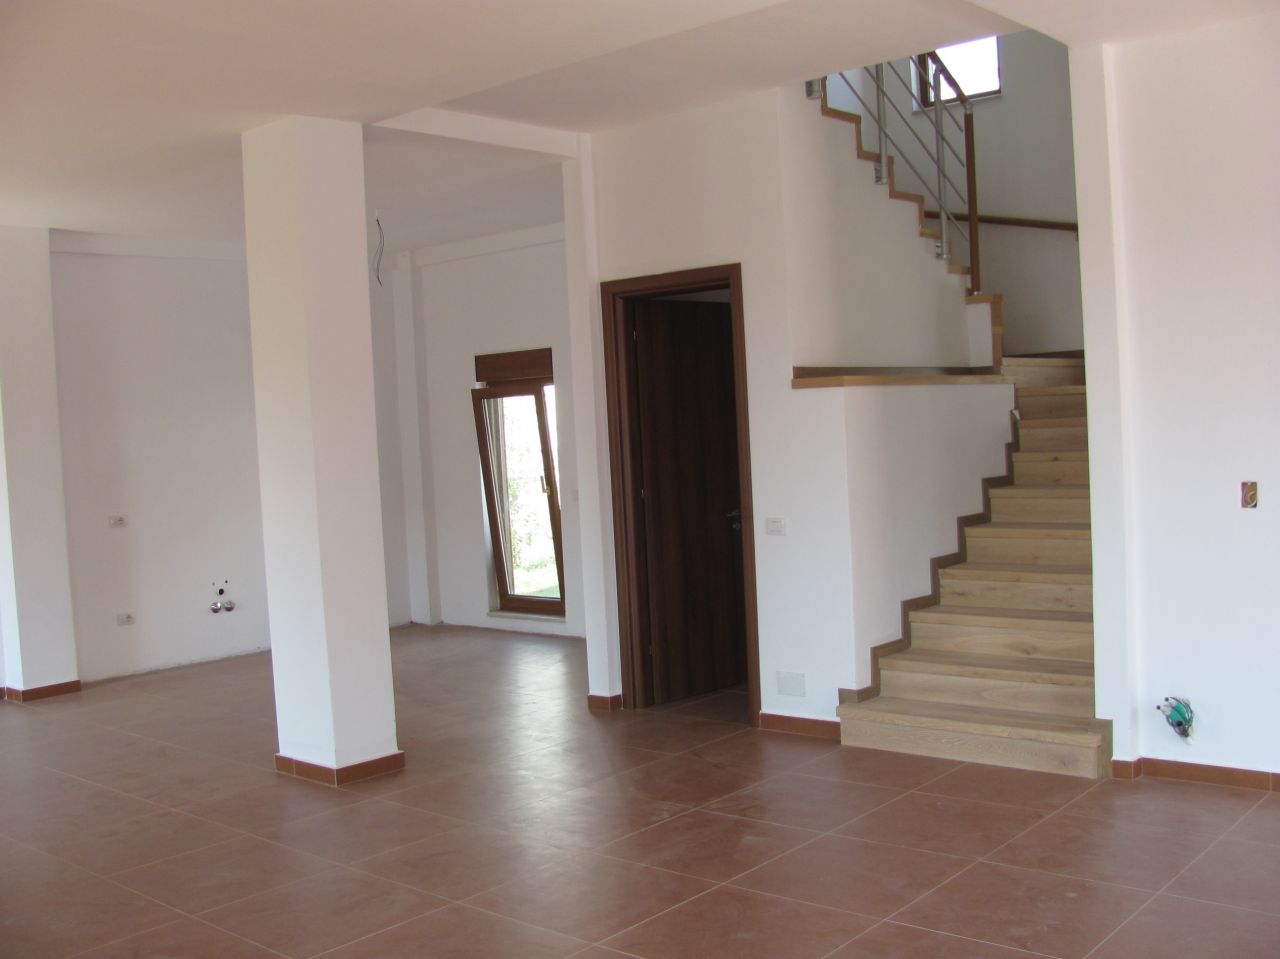 property for rent in tirana, the construction is brand new and the place very peaceful